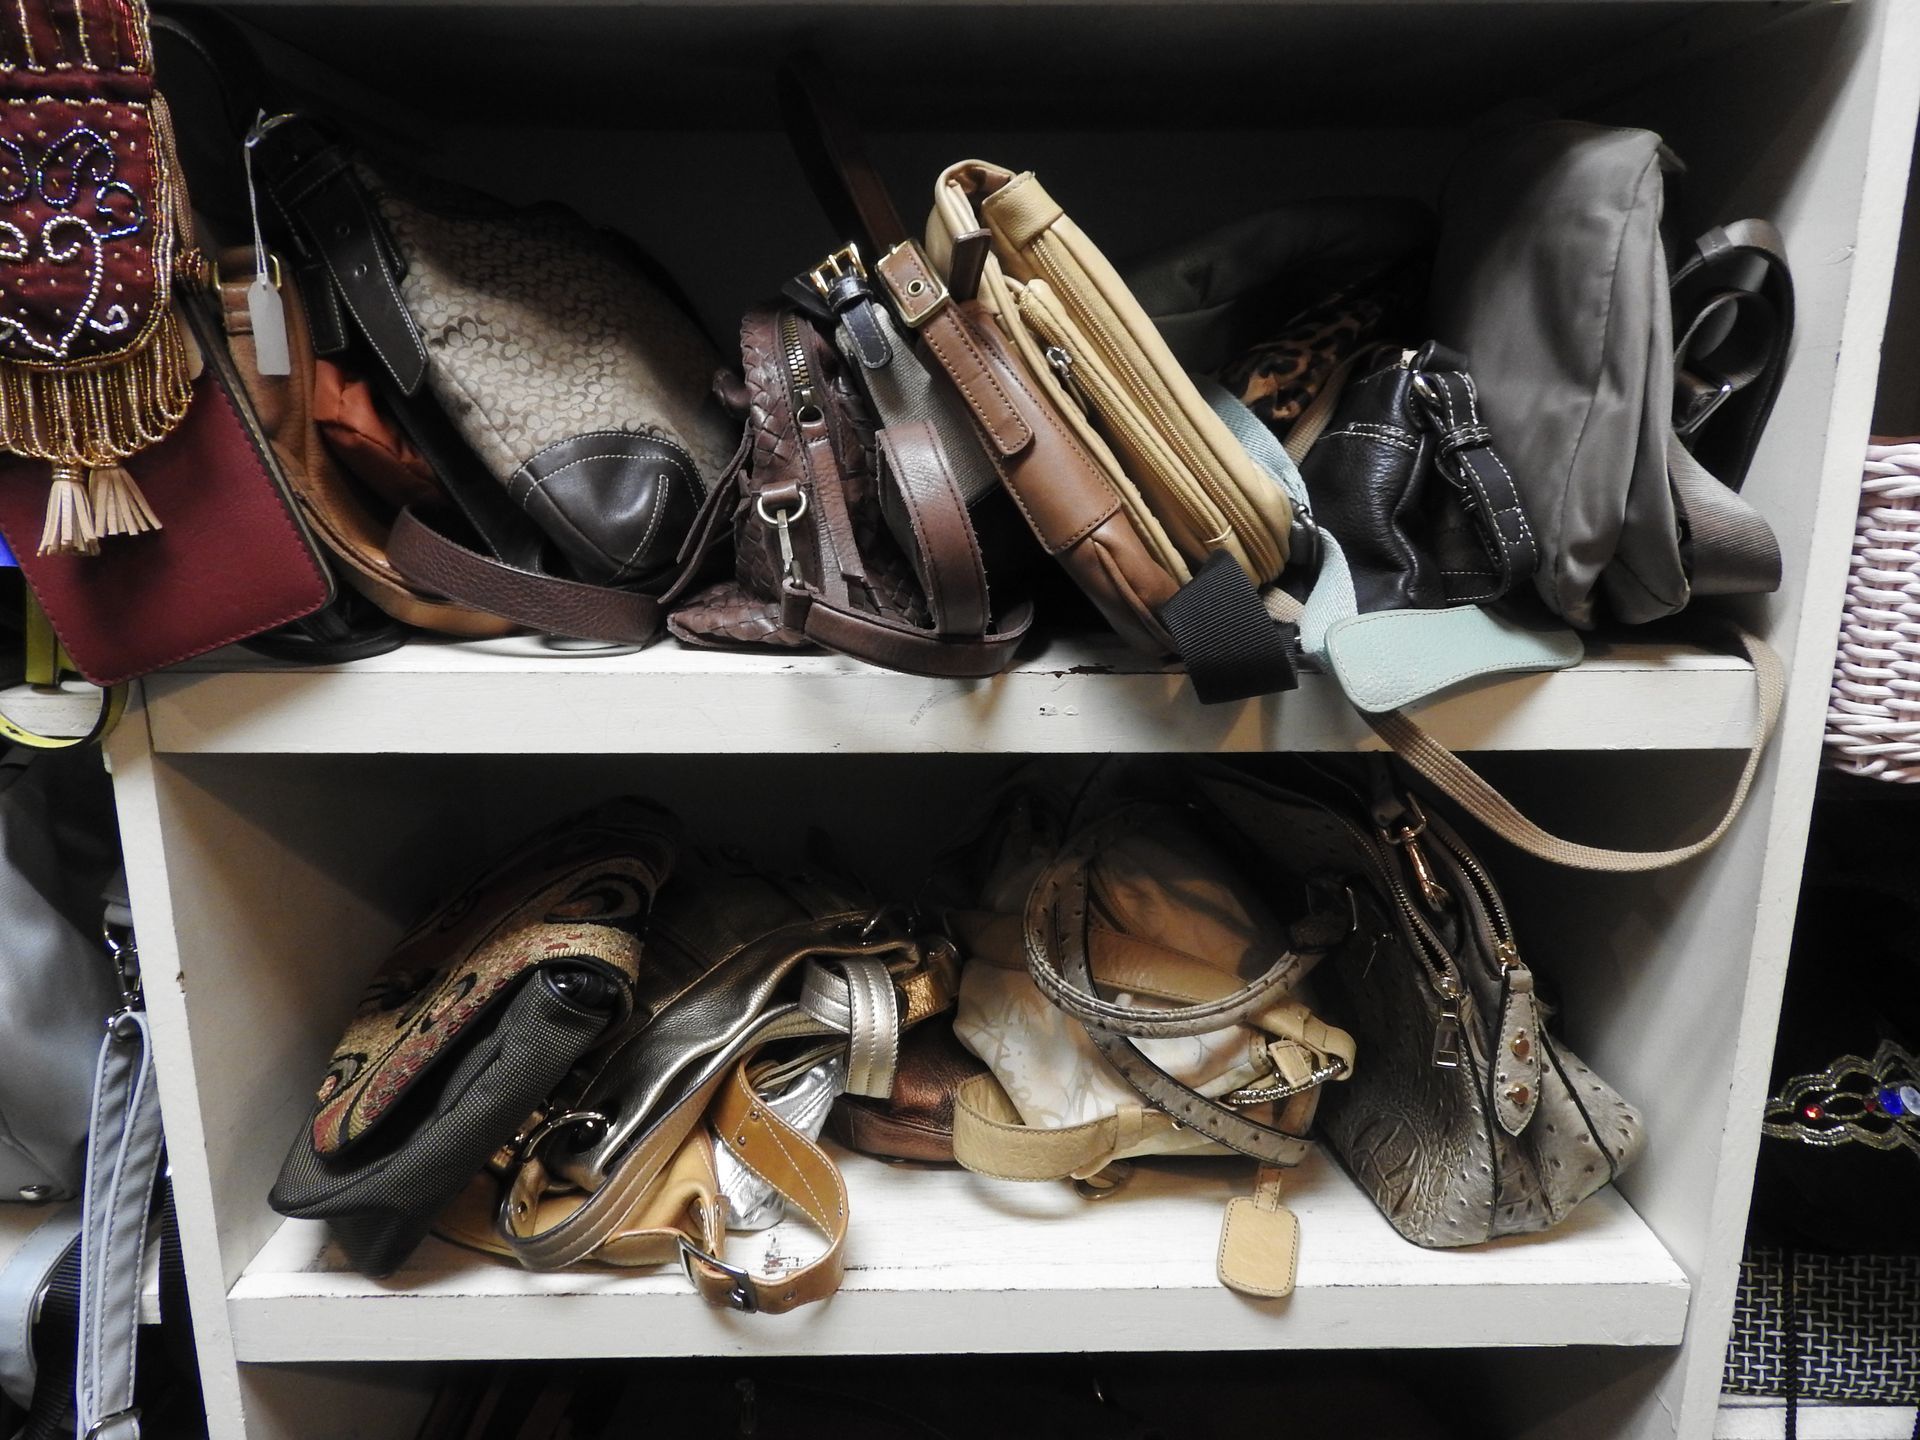 Purses in different colors